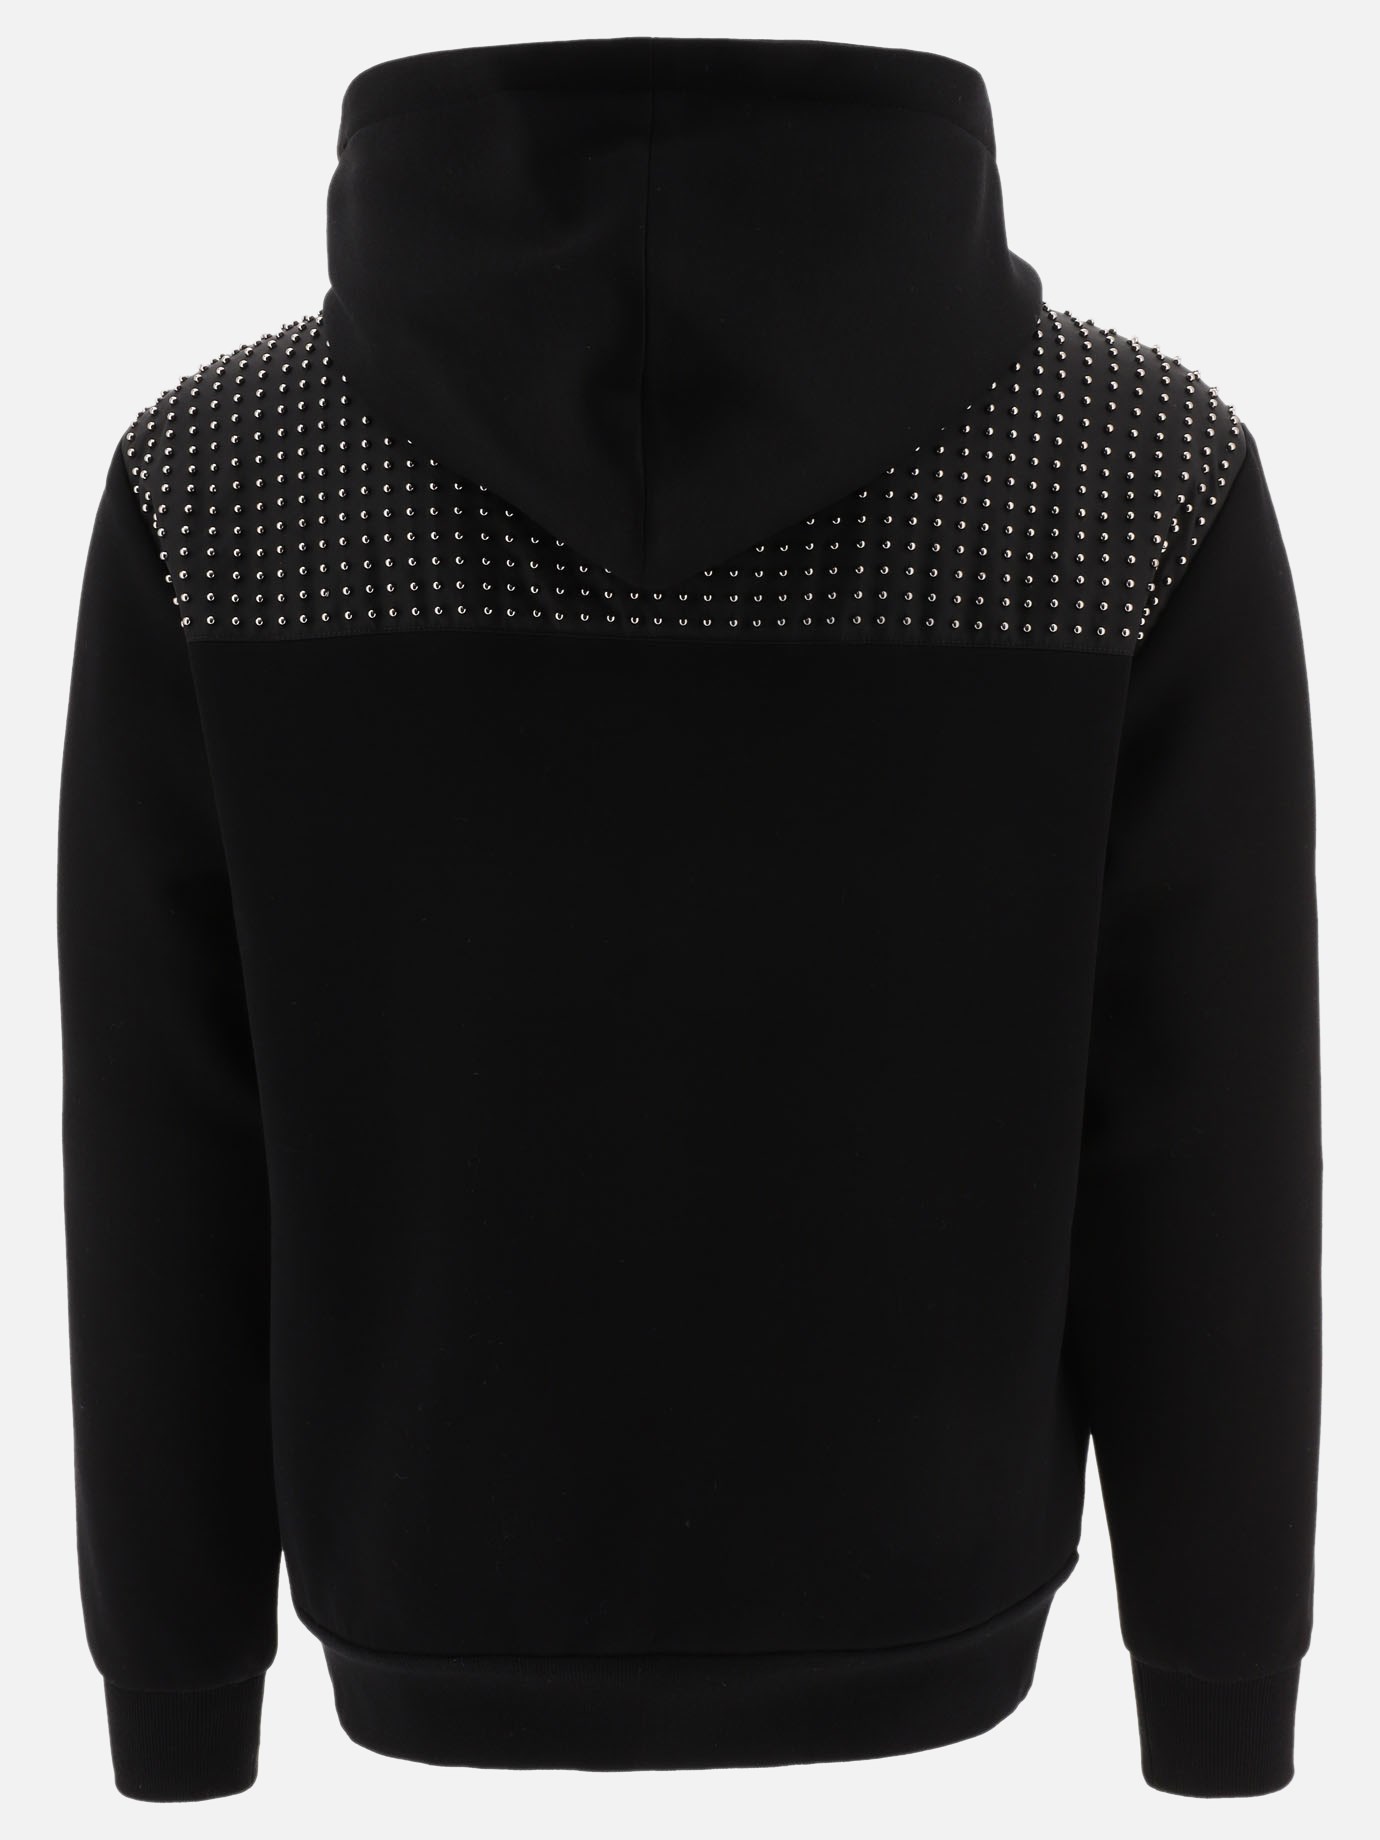  Double  hoodie with studs by Prada